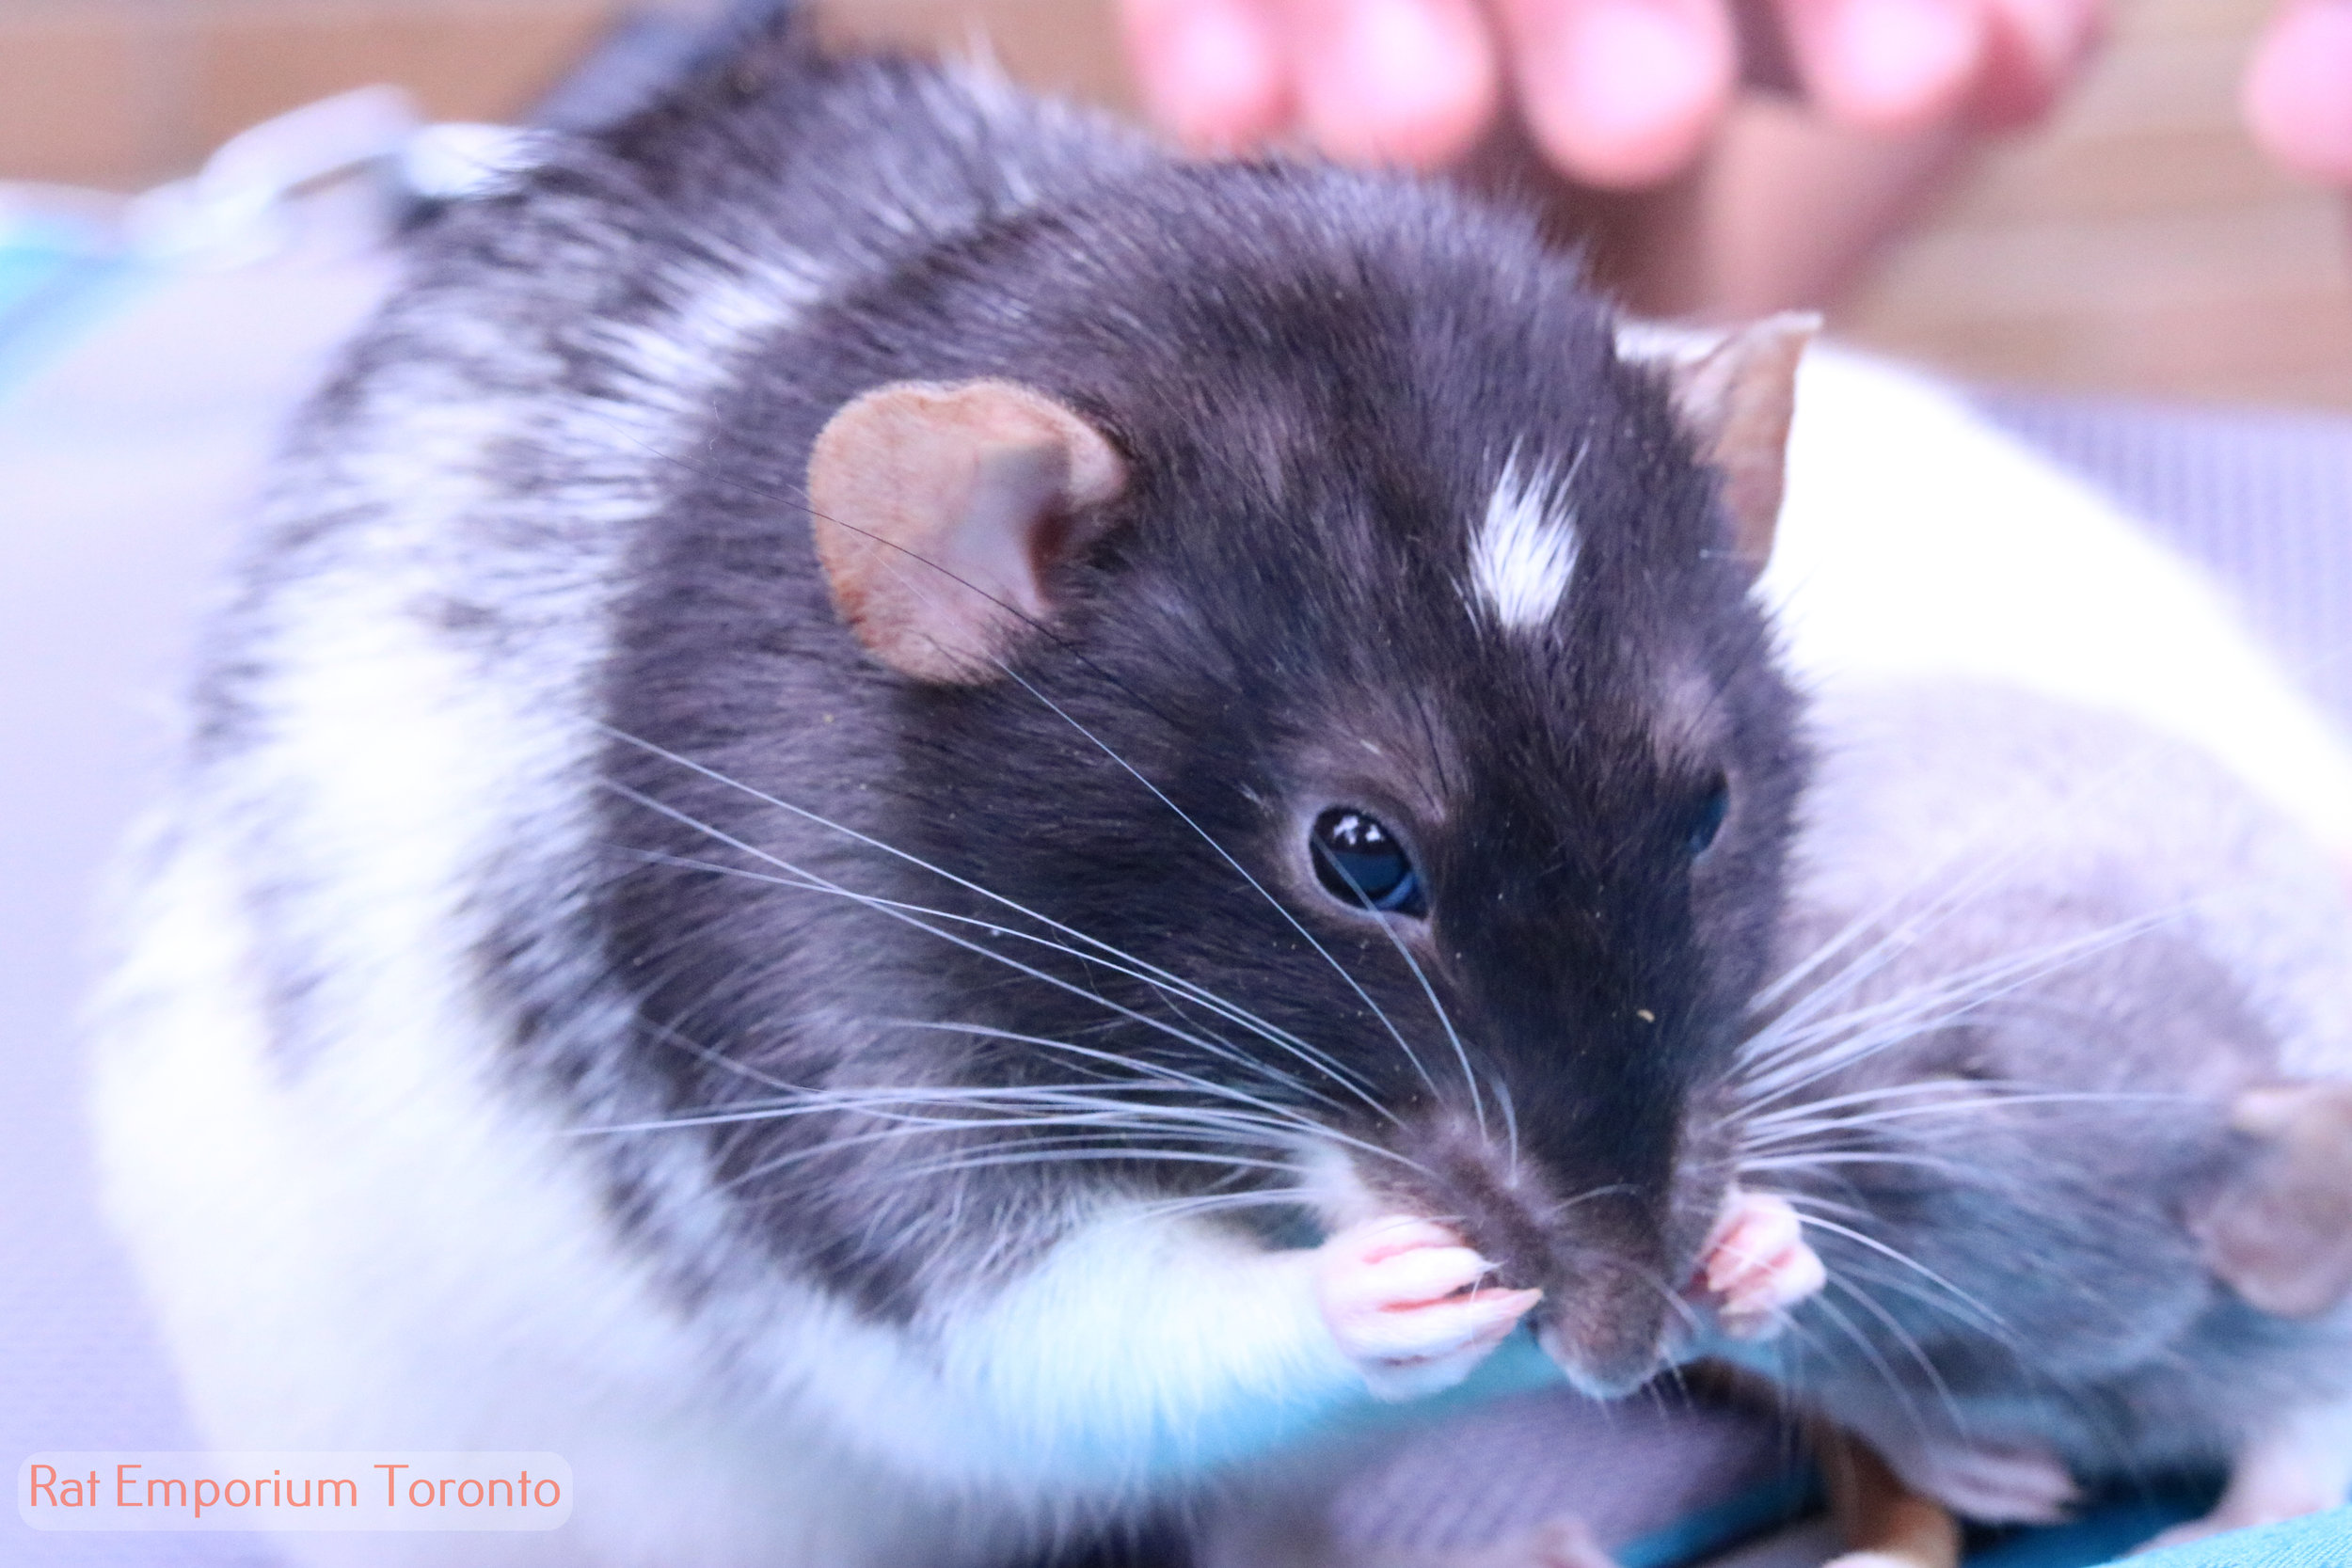 black and white variegated dumbo rat - born and raised at the Rat Emporium Toronto - rat breeder Toronto - adopt pet rats - learn about rats